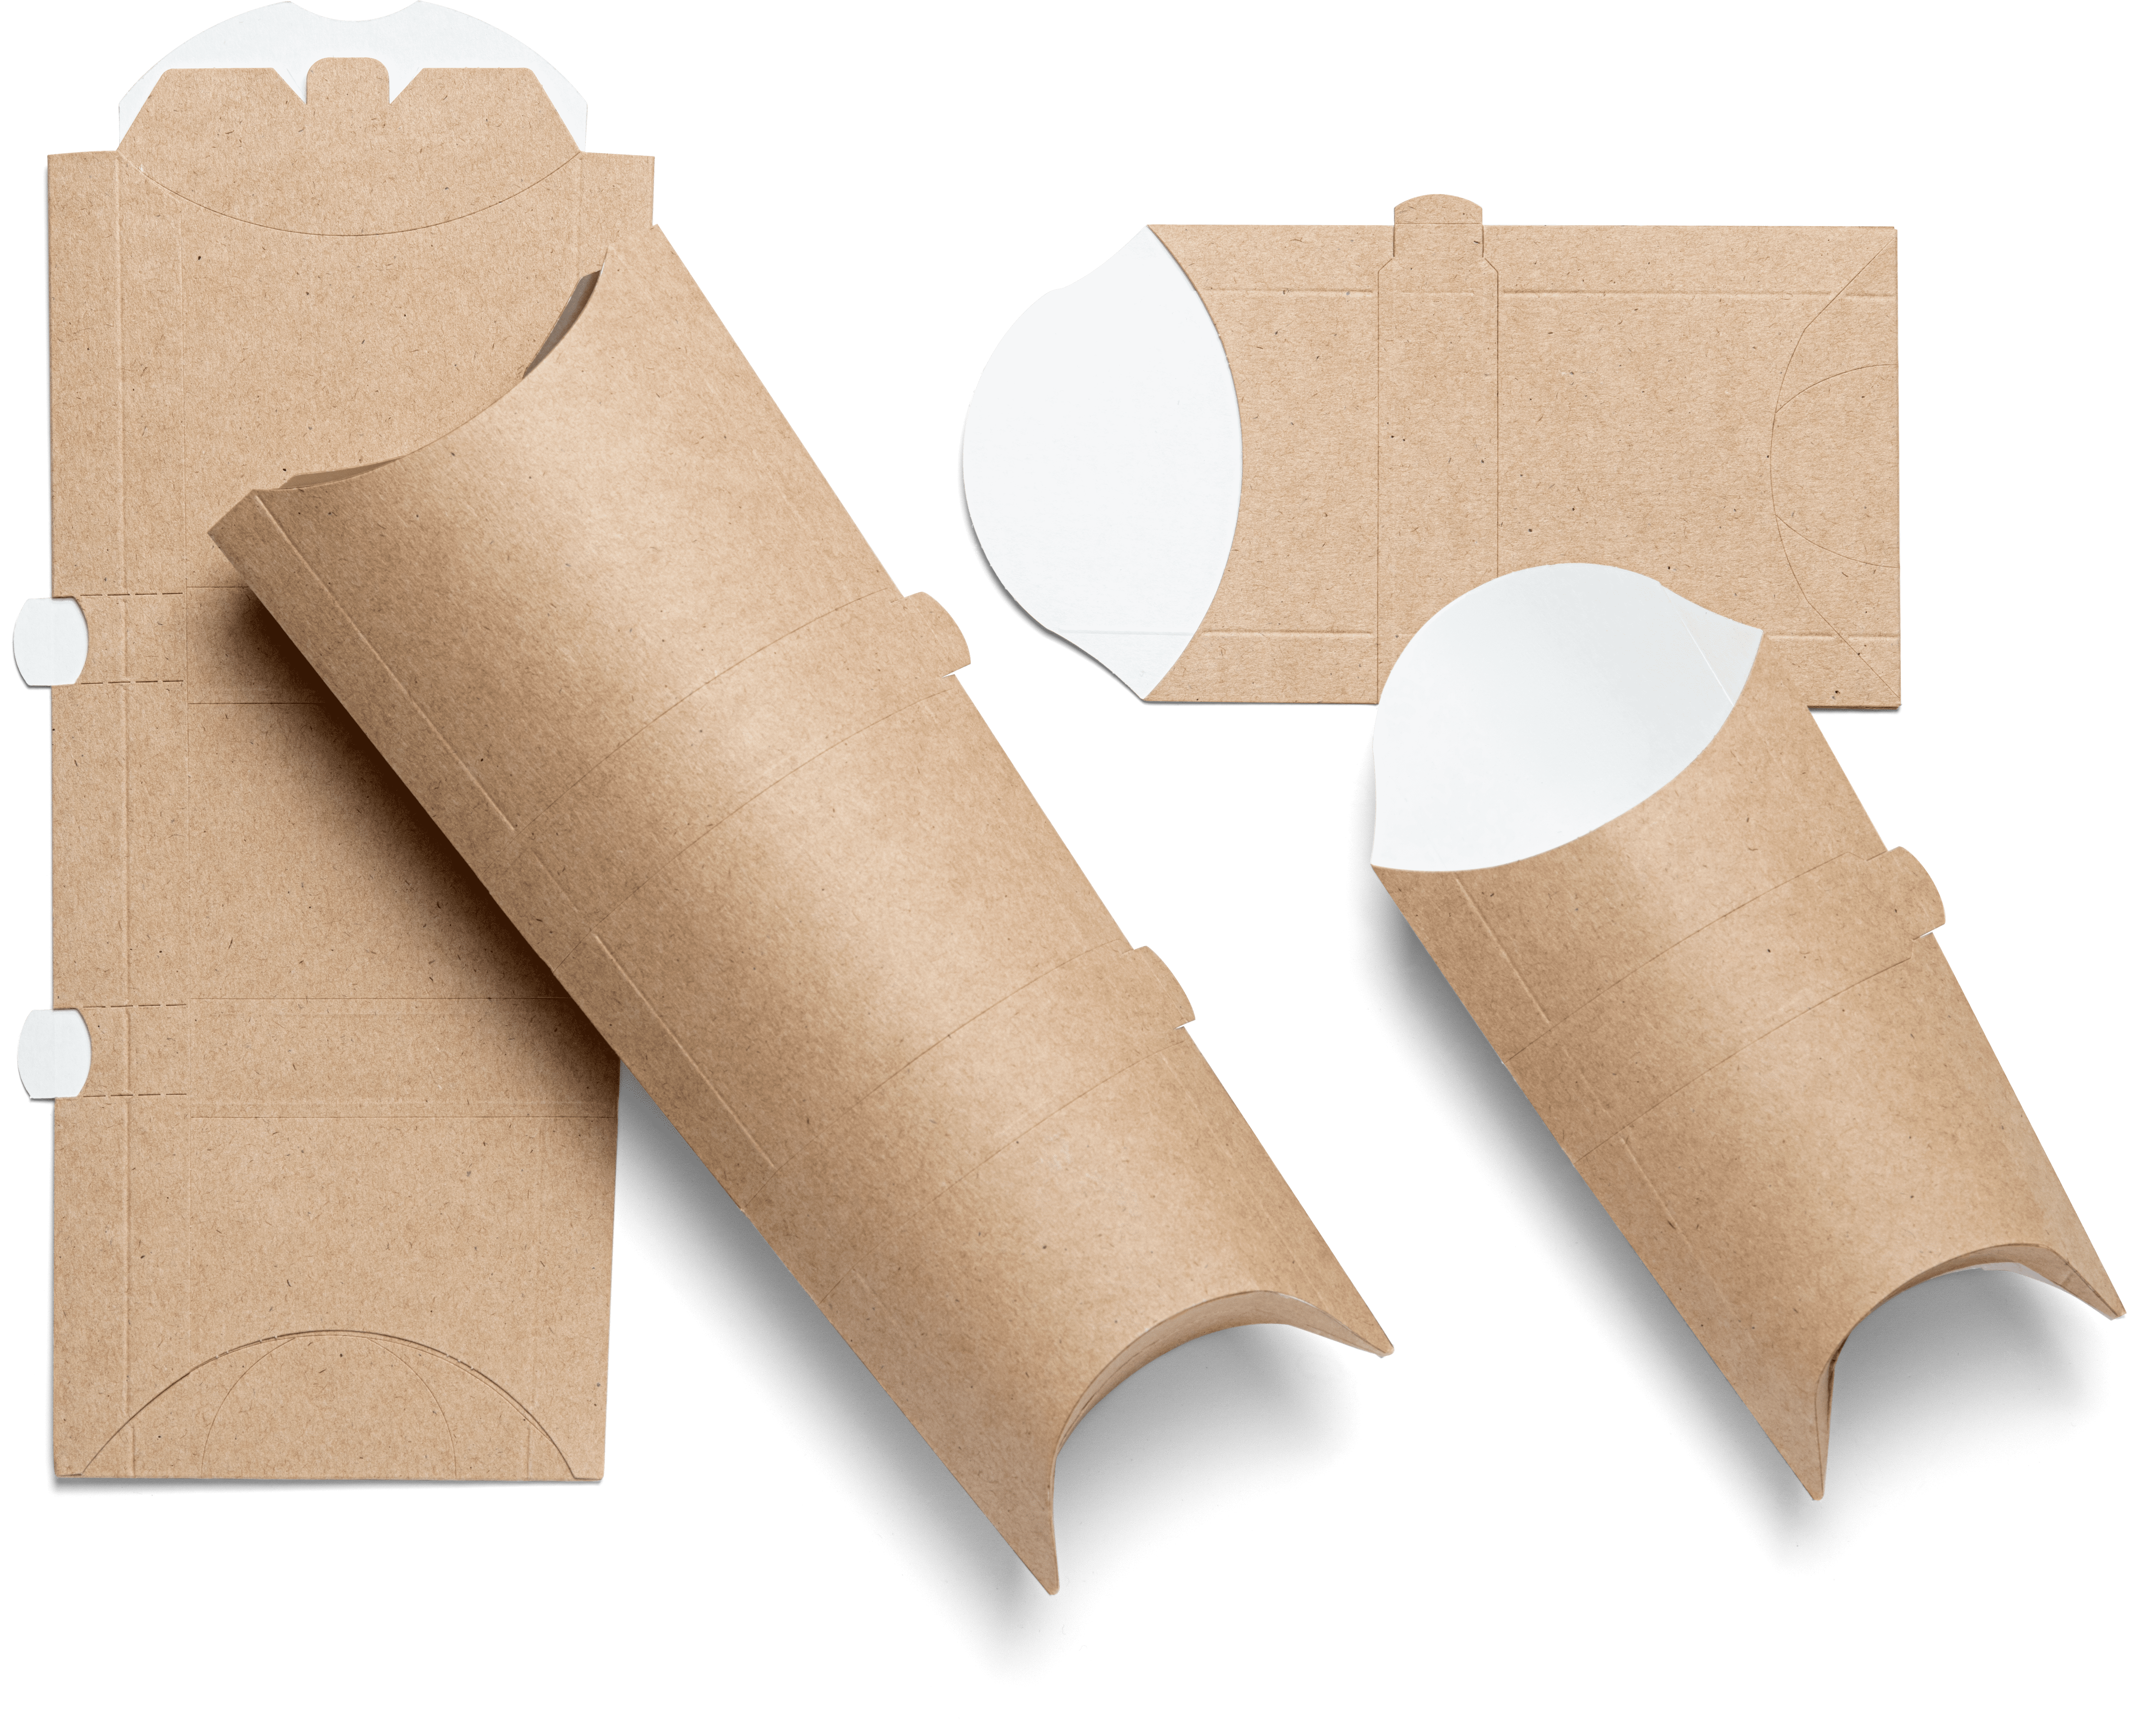 OSQ PILLOW S packaging for rolls